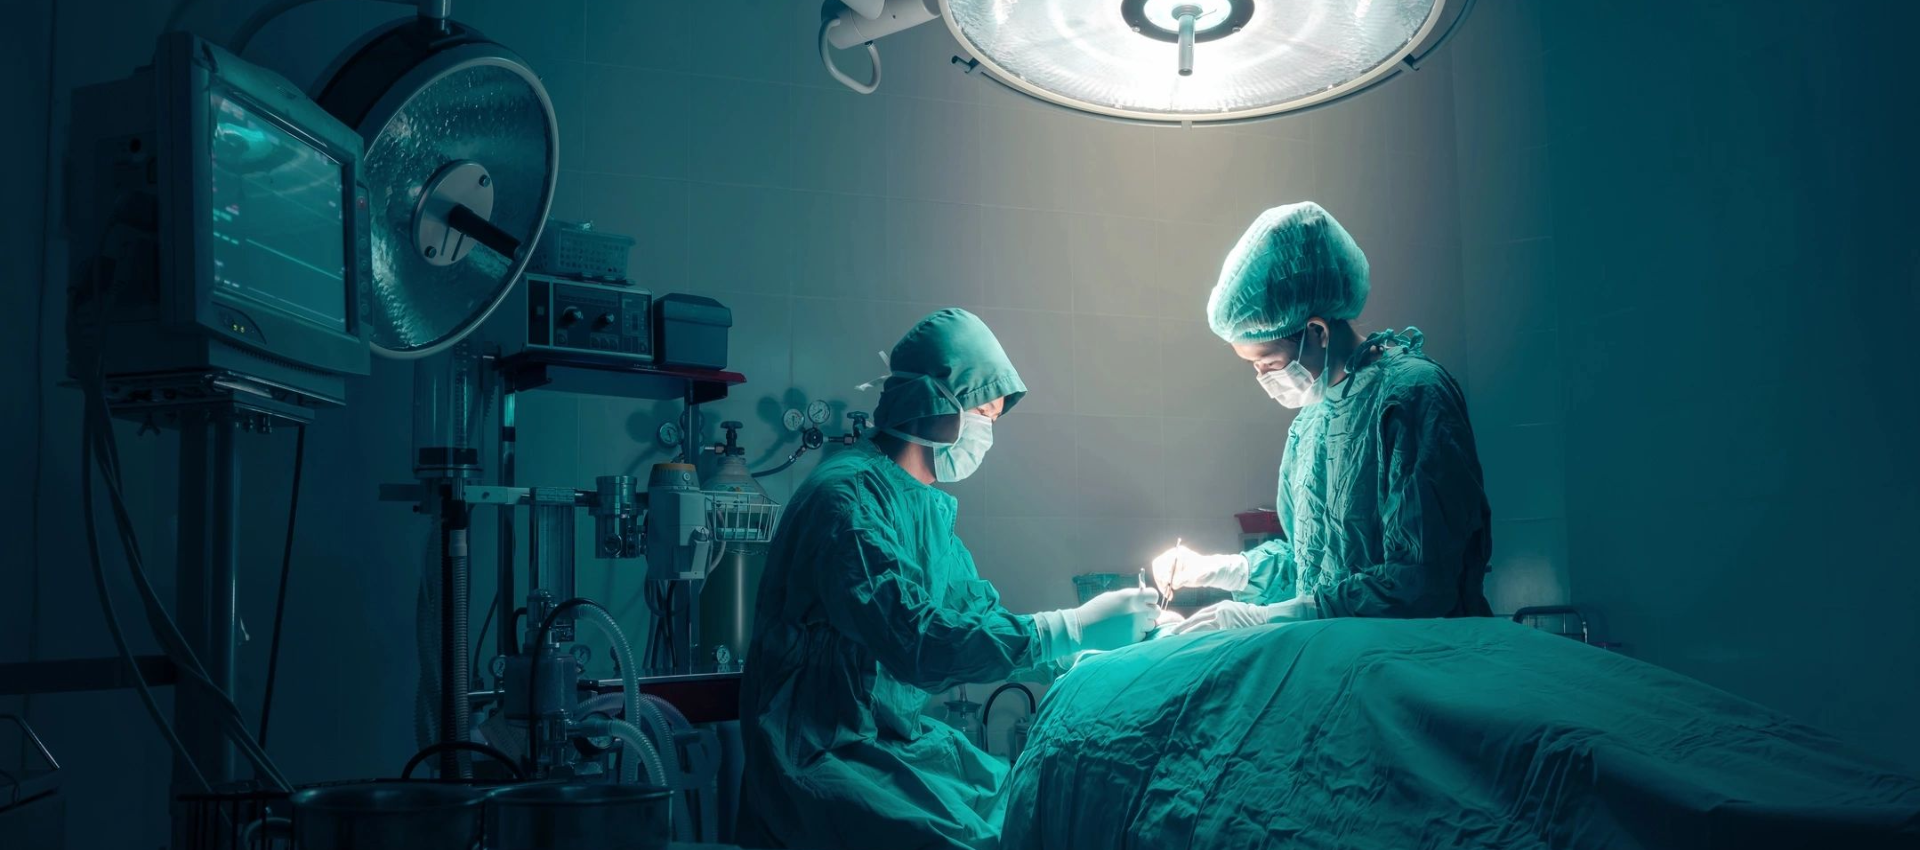 Two board-certified orthopedic surgeons operate on a patient in a surgical room under bright overhead lights.